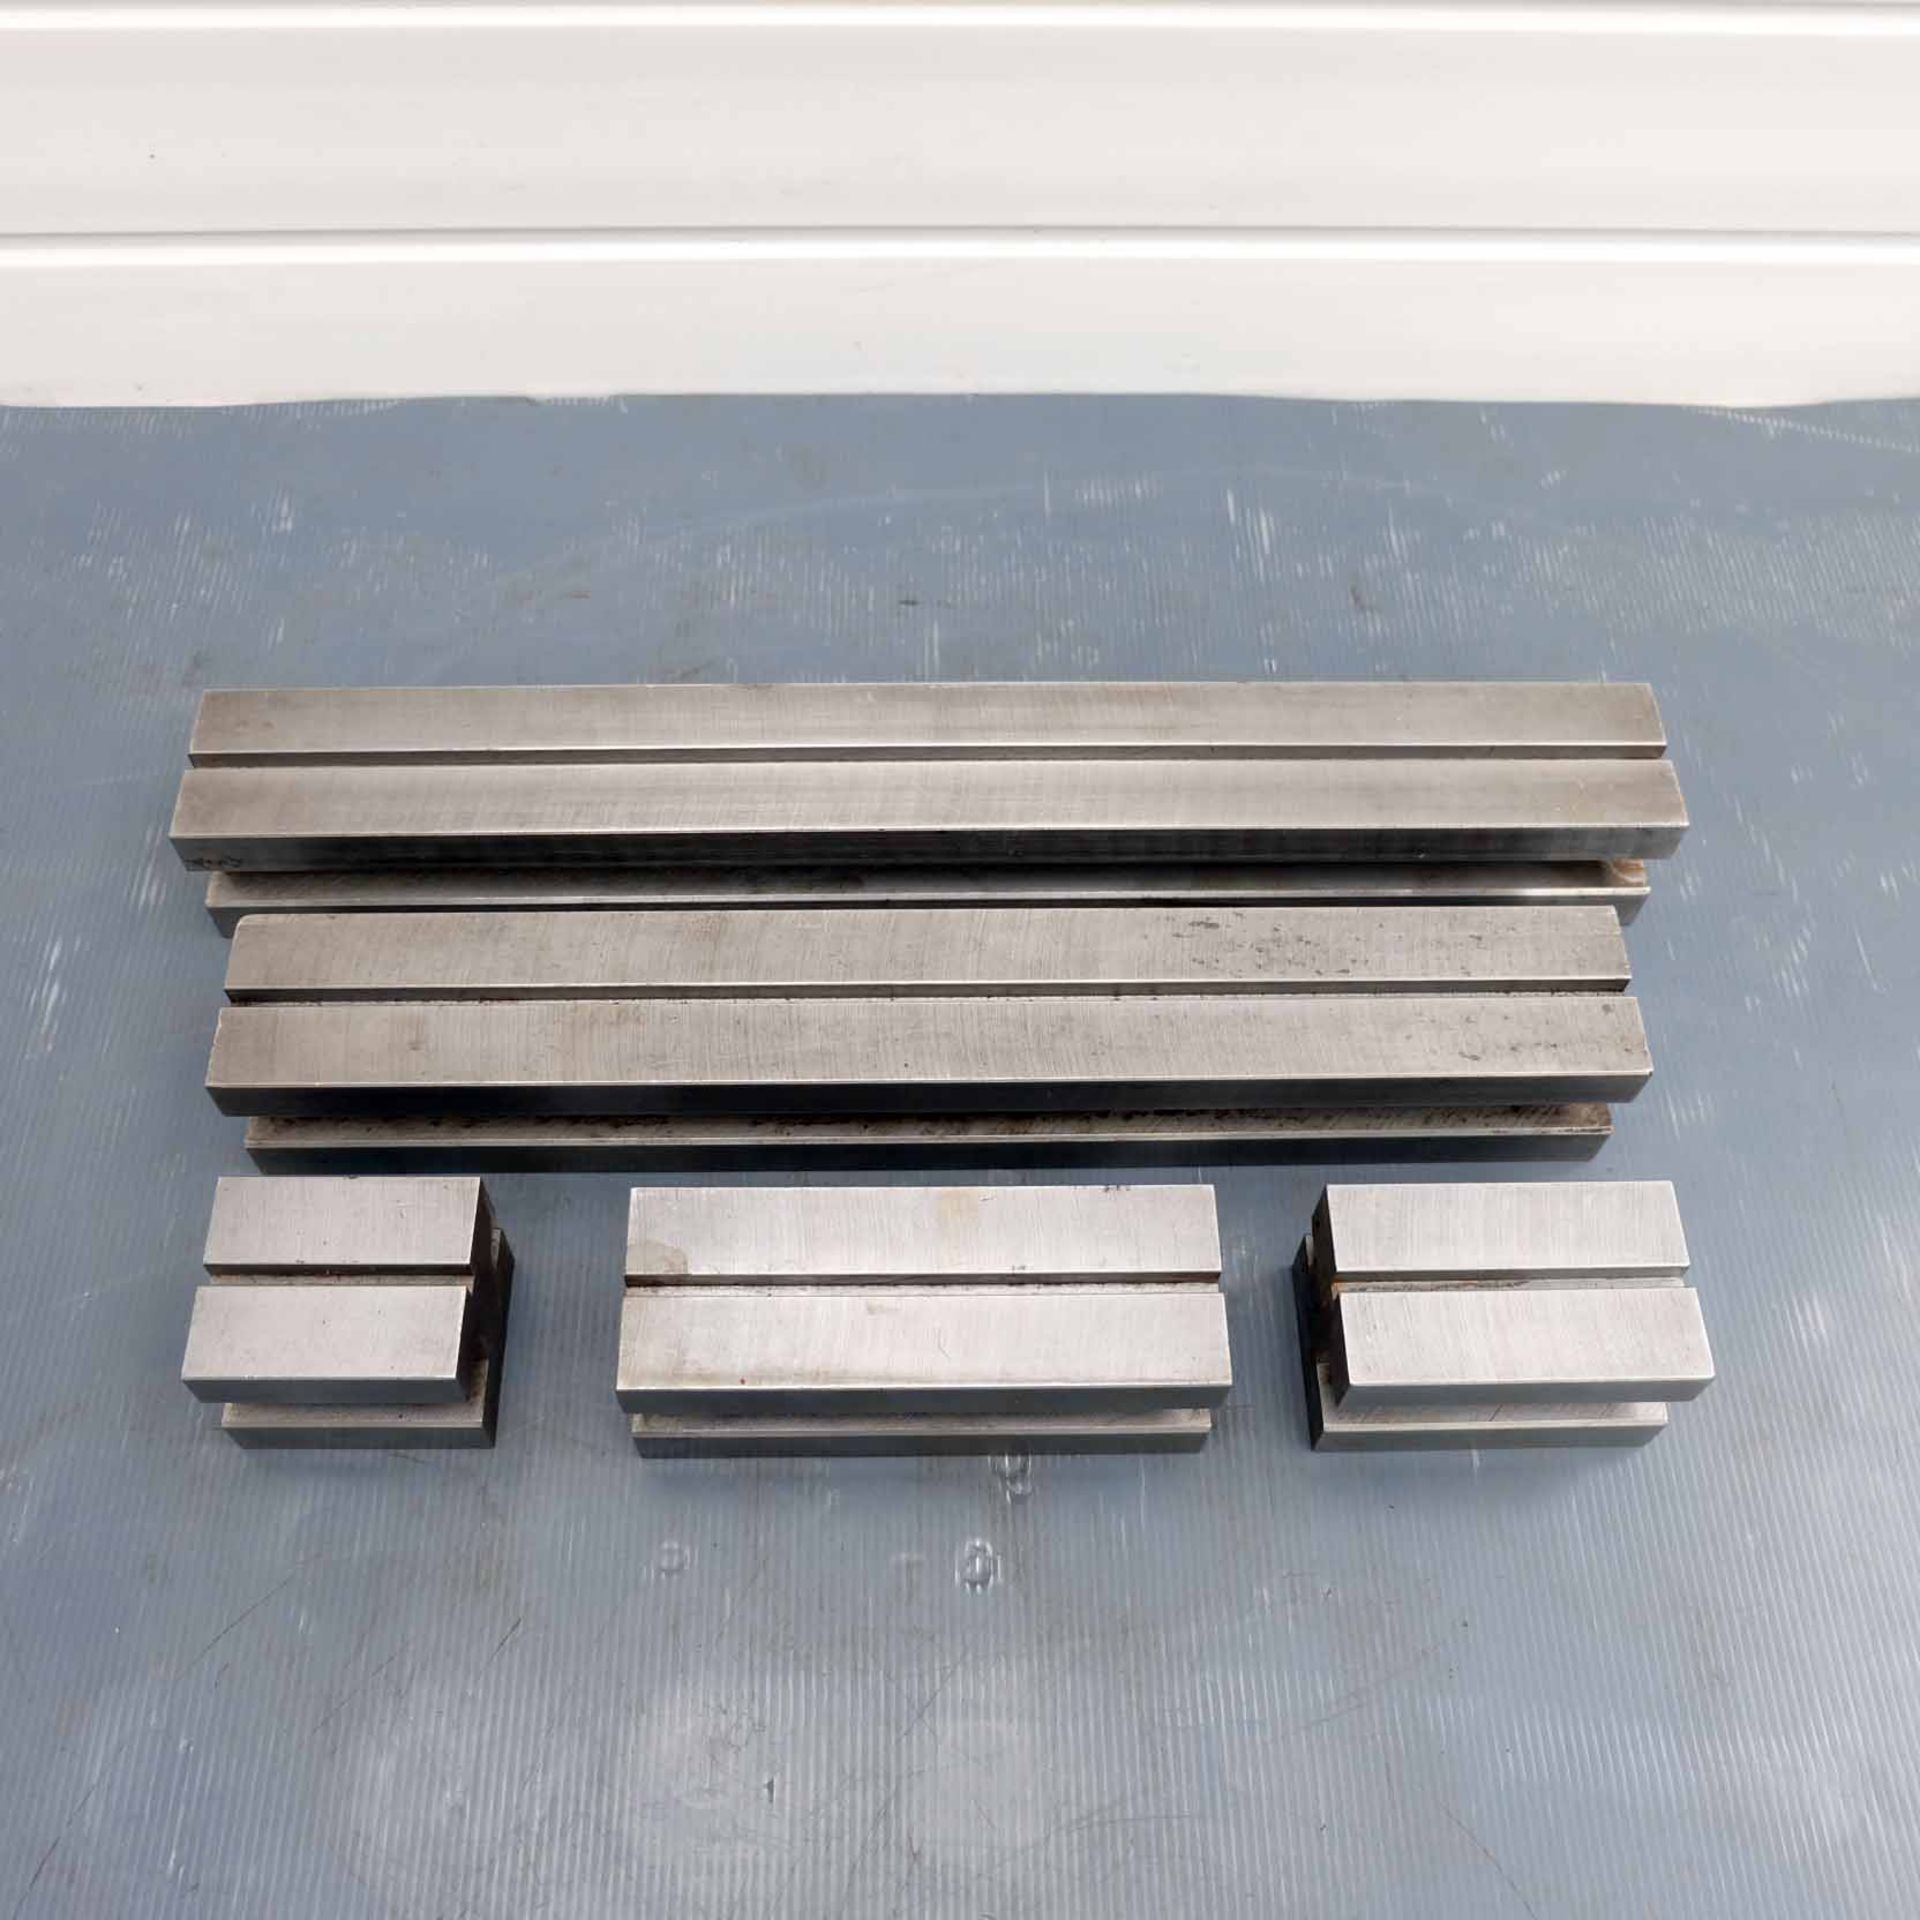 60mm Square Bottom Press Brake Tooling. With 3 Grooves: 6mm, 10mm, 18mm. Lengths 75mm, 100mm, 166mm,